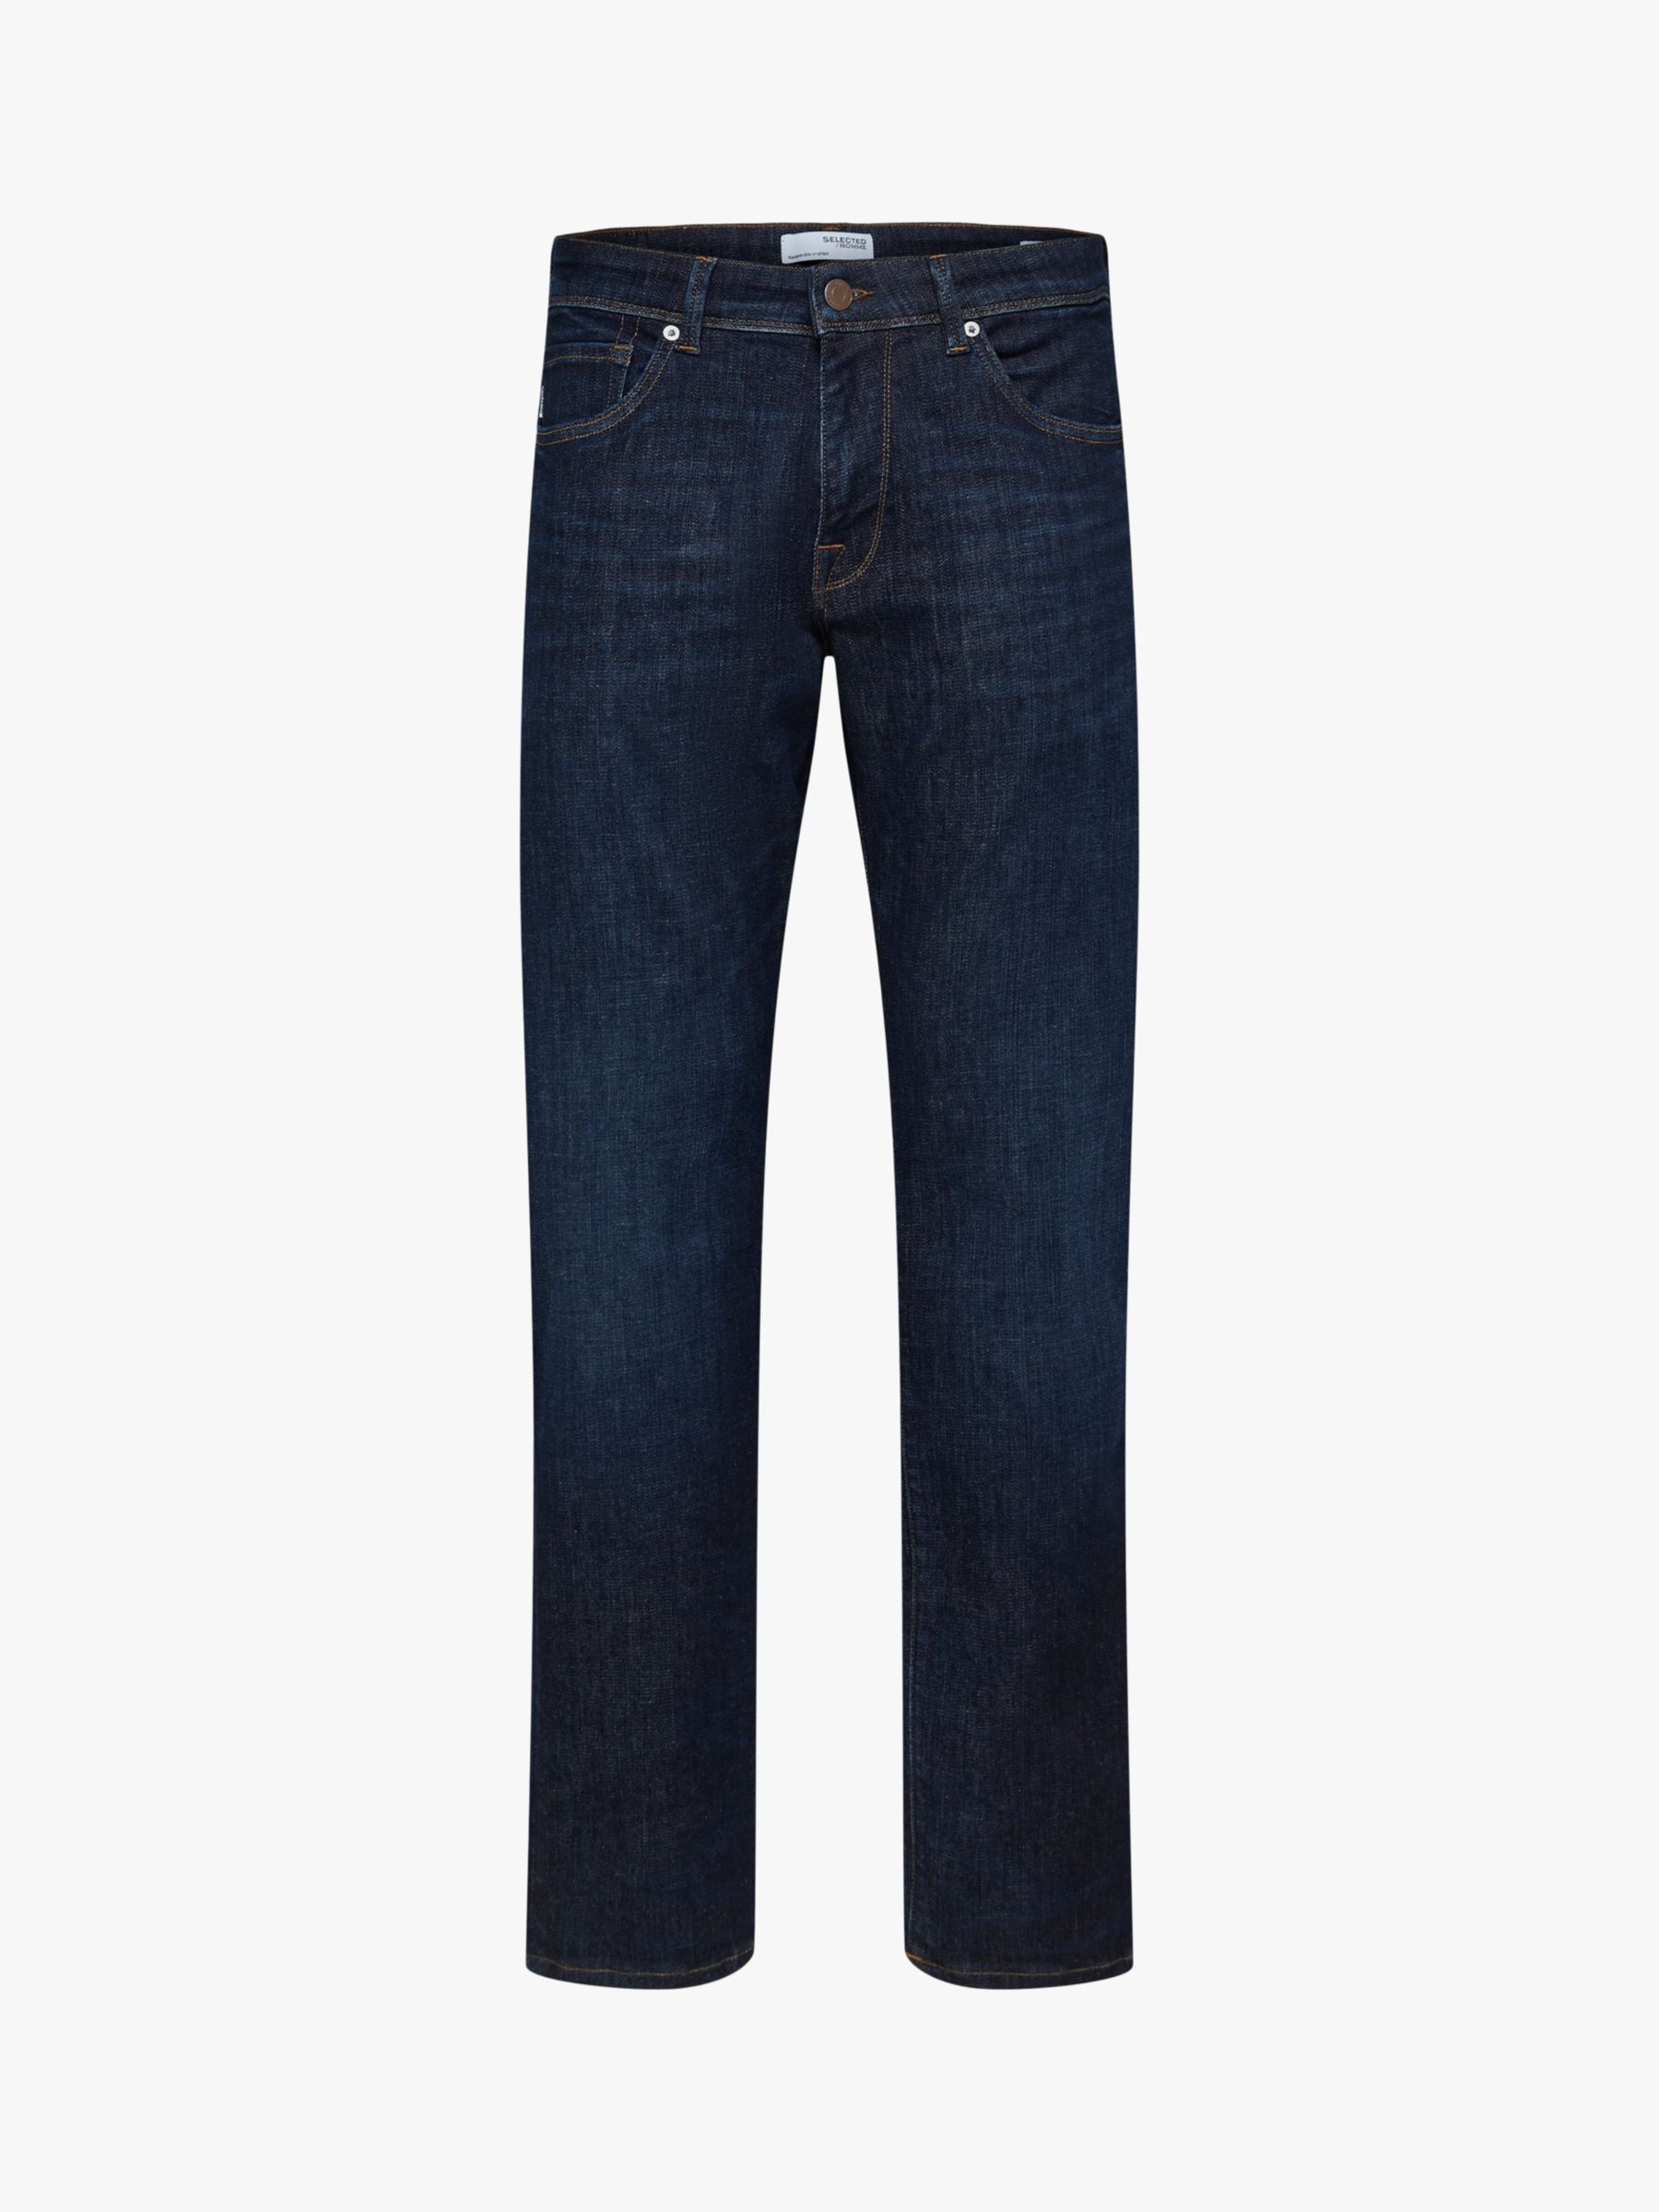 SELECTED HOMME Everyday Straight Jeans, Blue, 32R